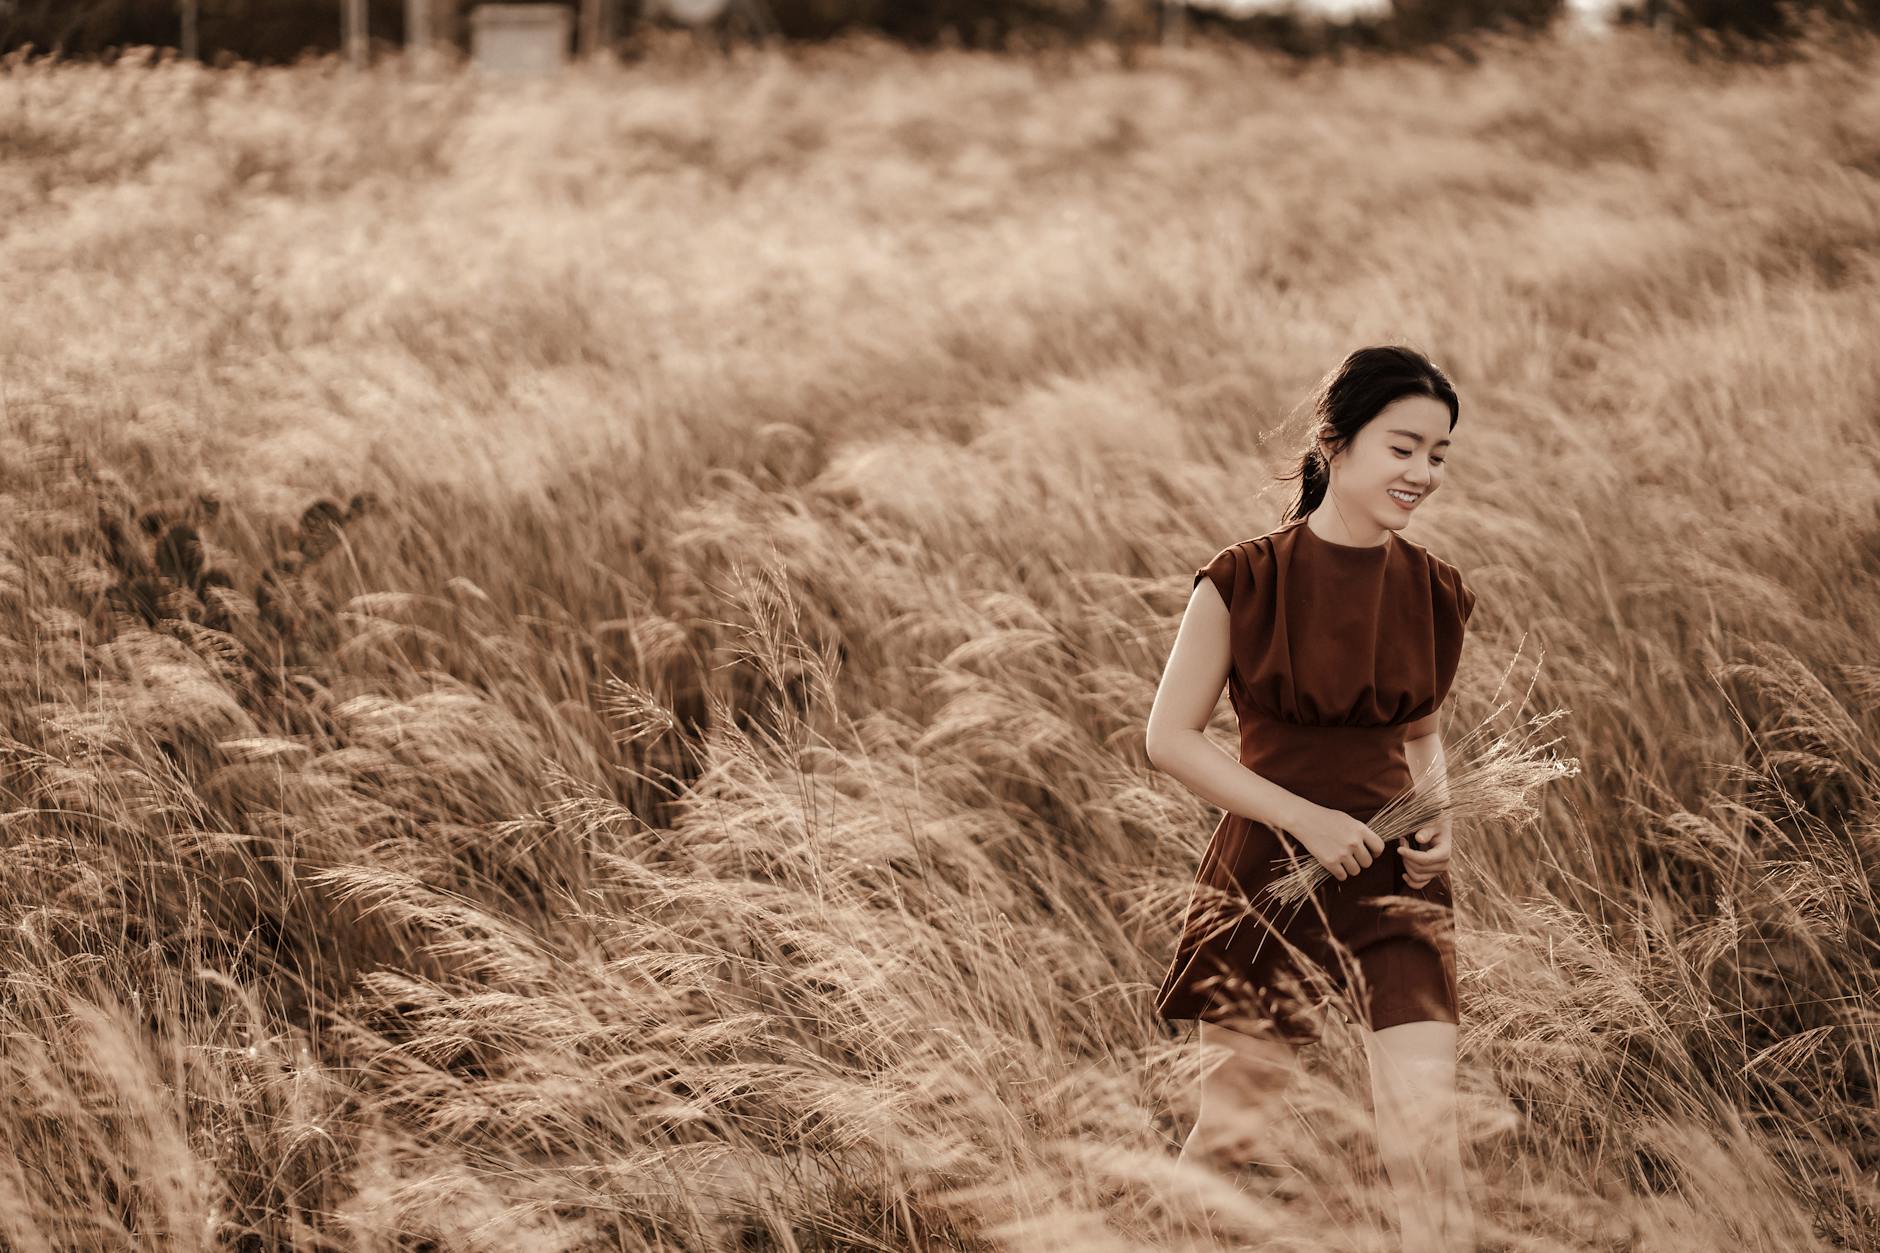 Smiling ethnic woman walking among grass in field · Free Stock Photo